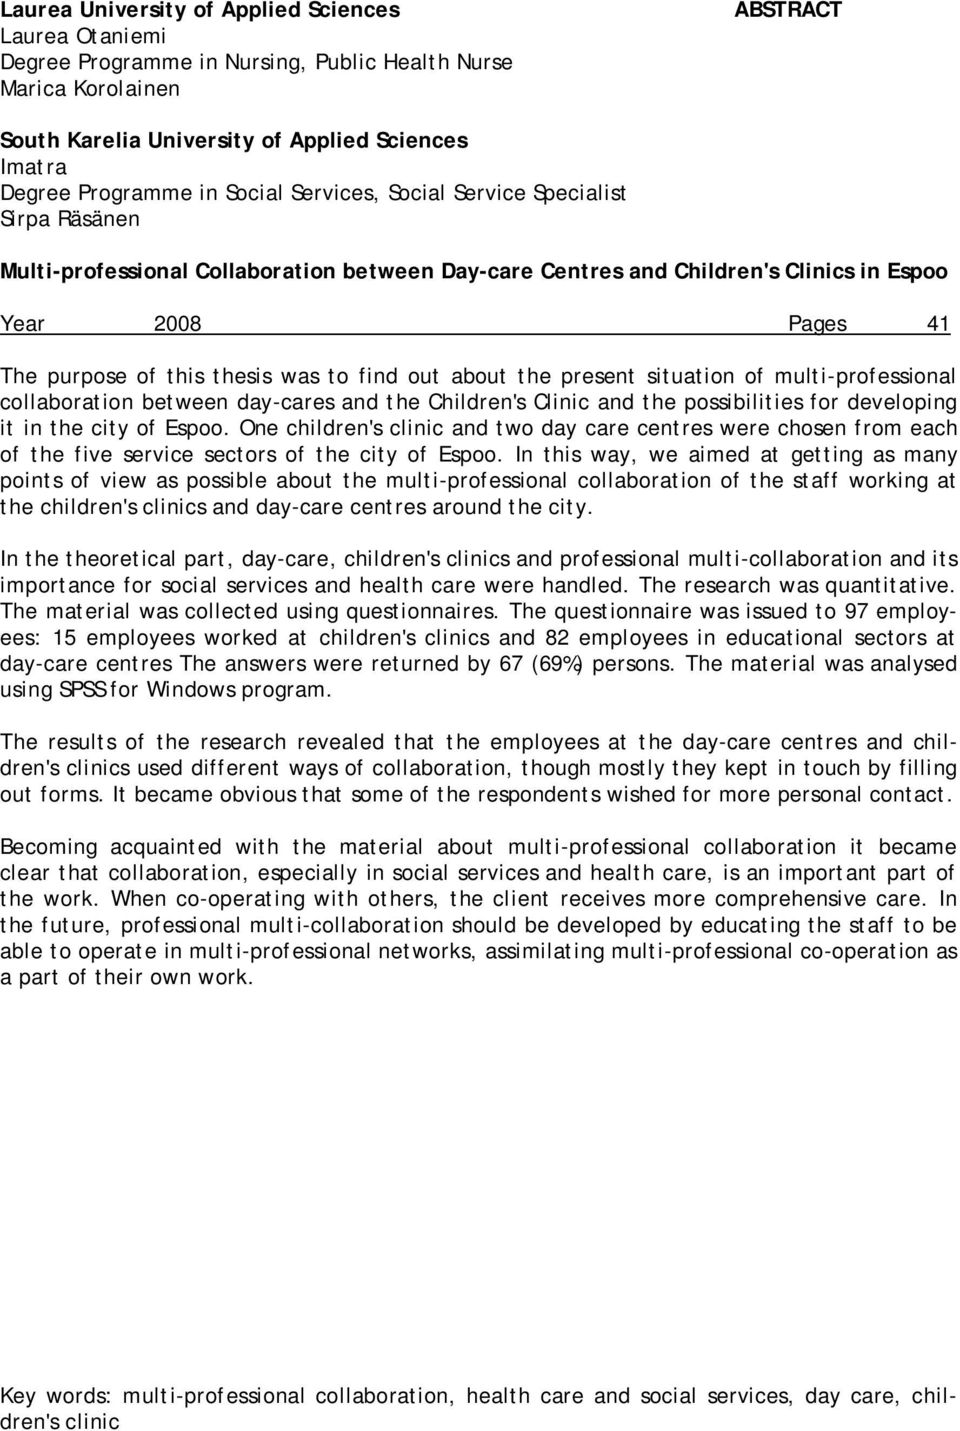 to find out about the present situation of multi-professional collaboration between day-cares and the Children's Clinic and the possibilities for developing it in the city of Espoo.